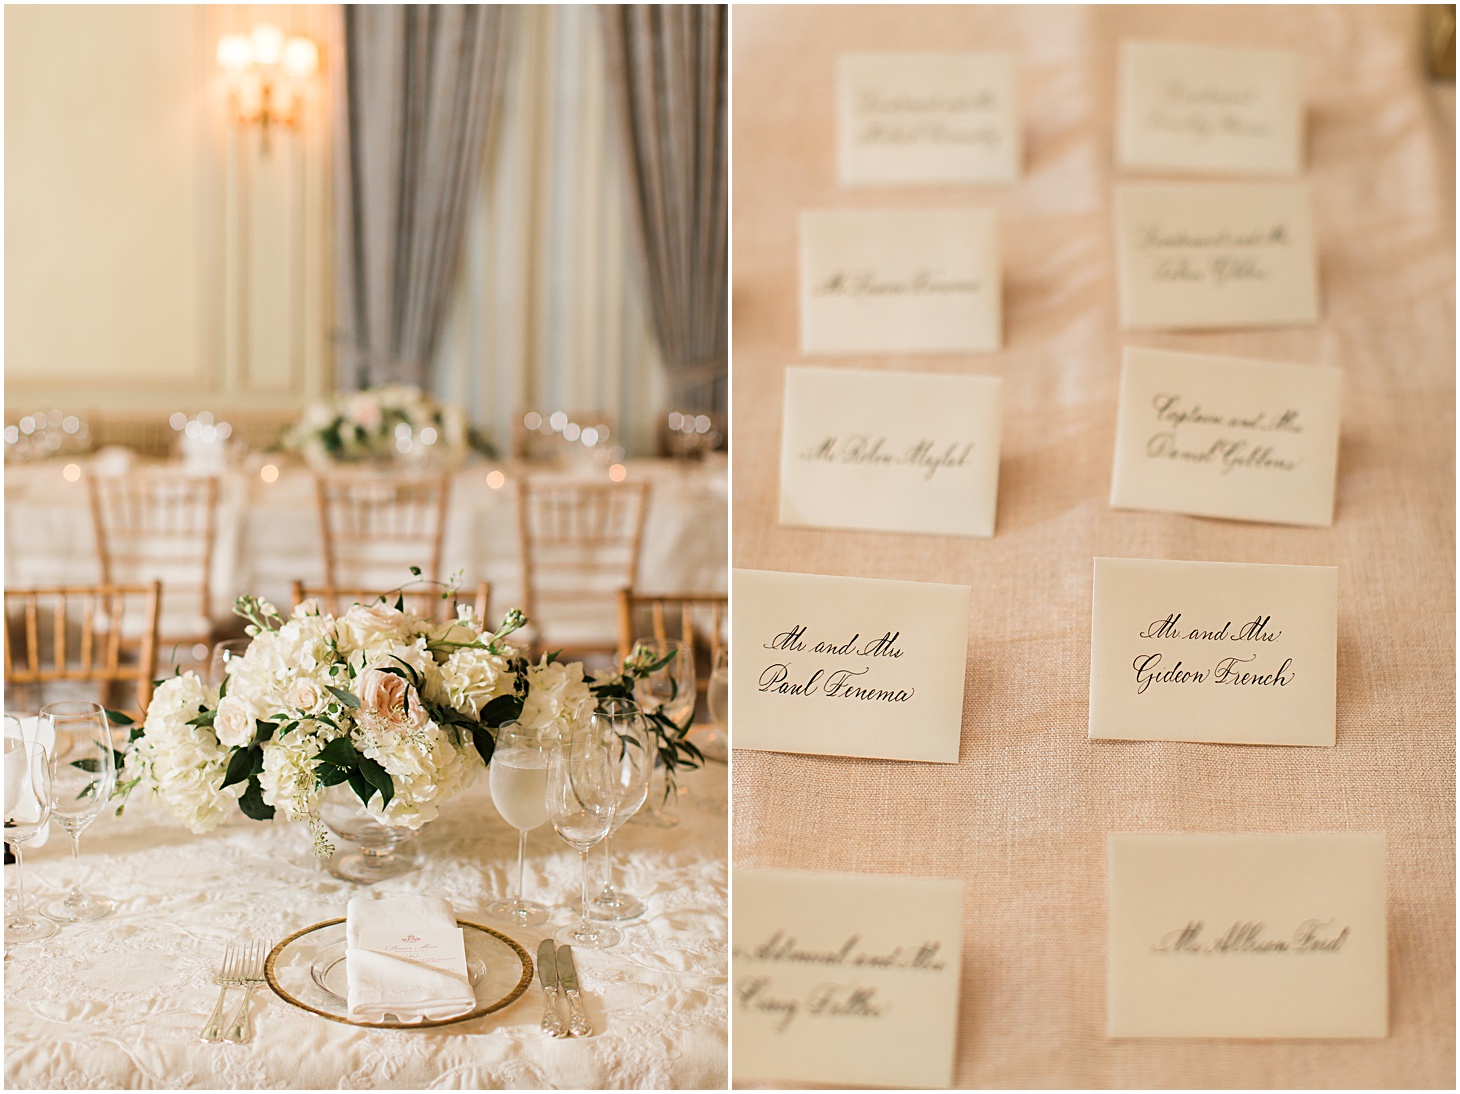 Calligraphy by Arney Walker - A Thoroughly Washingtonian Wedding at Meridian House in DC by Sarah Bradshaw 